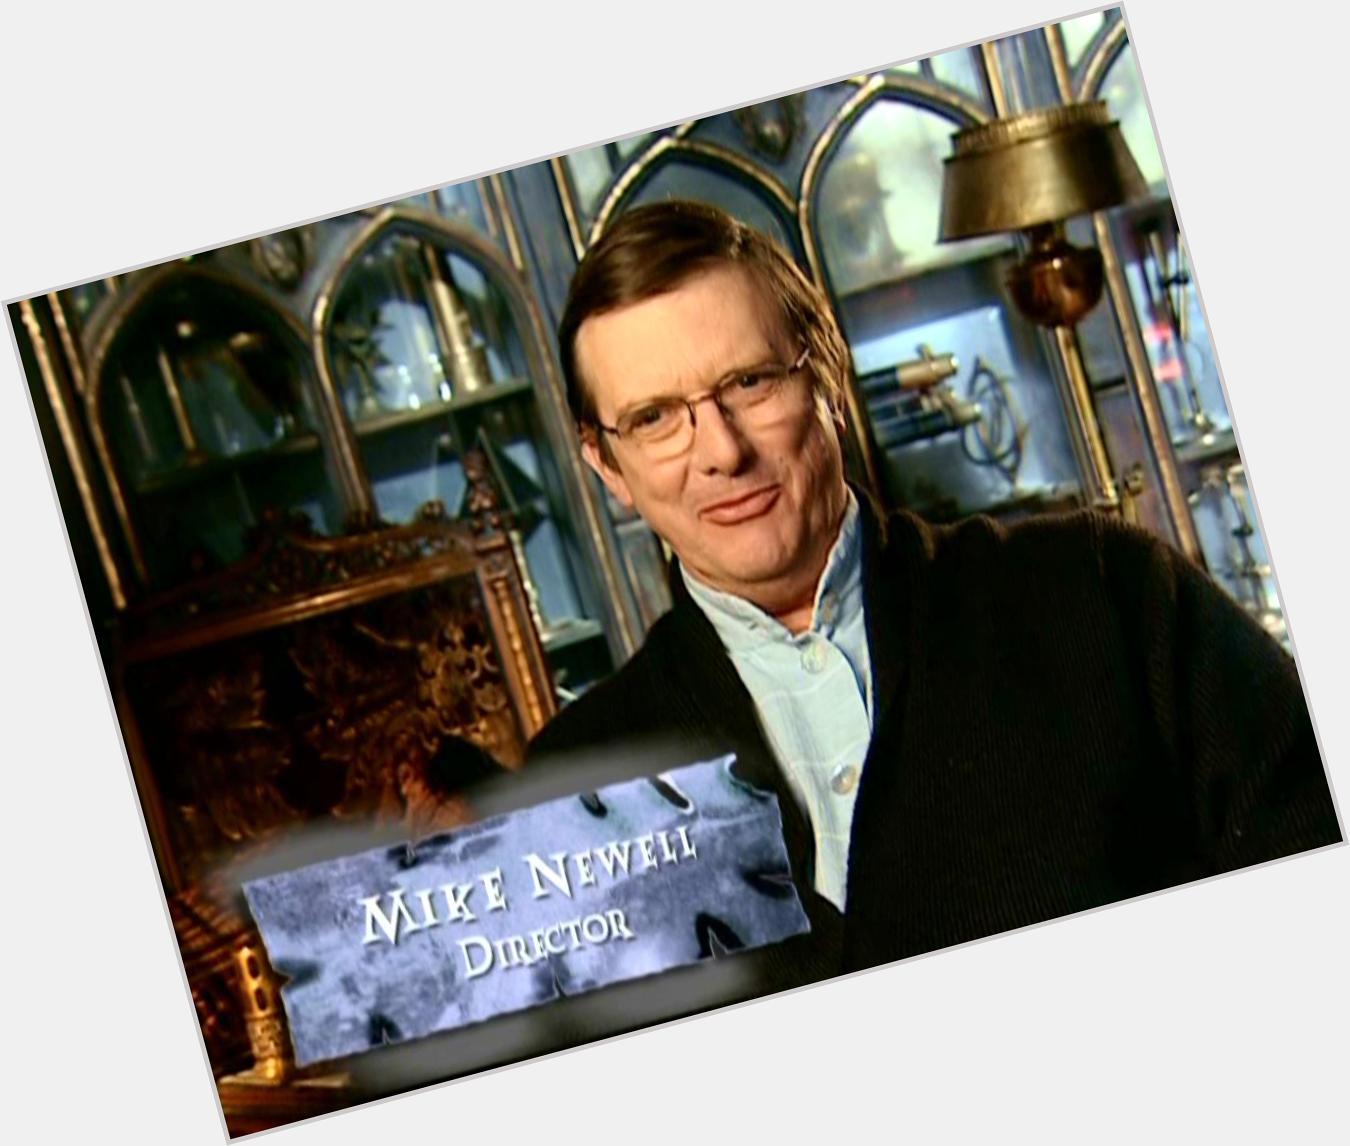 Happy 75th Birthday, Mike Newell! He was the director of the film adaptation of Harry Potter and the Goblet of Fire. 